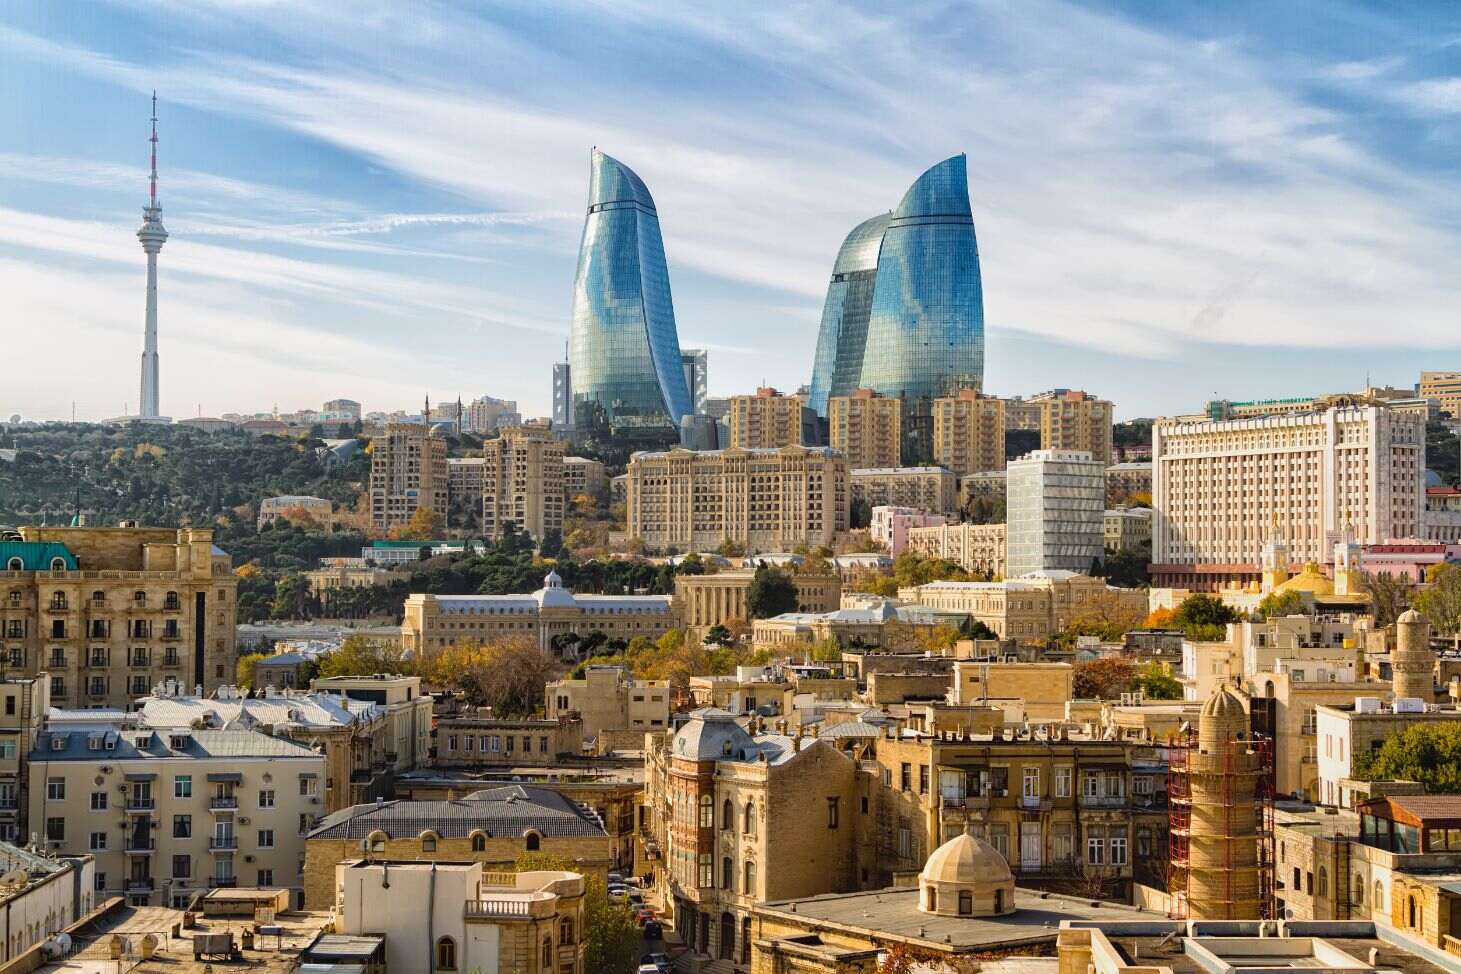 6-Day Cultural and Historical Tour in beautiful Azerbaijan